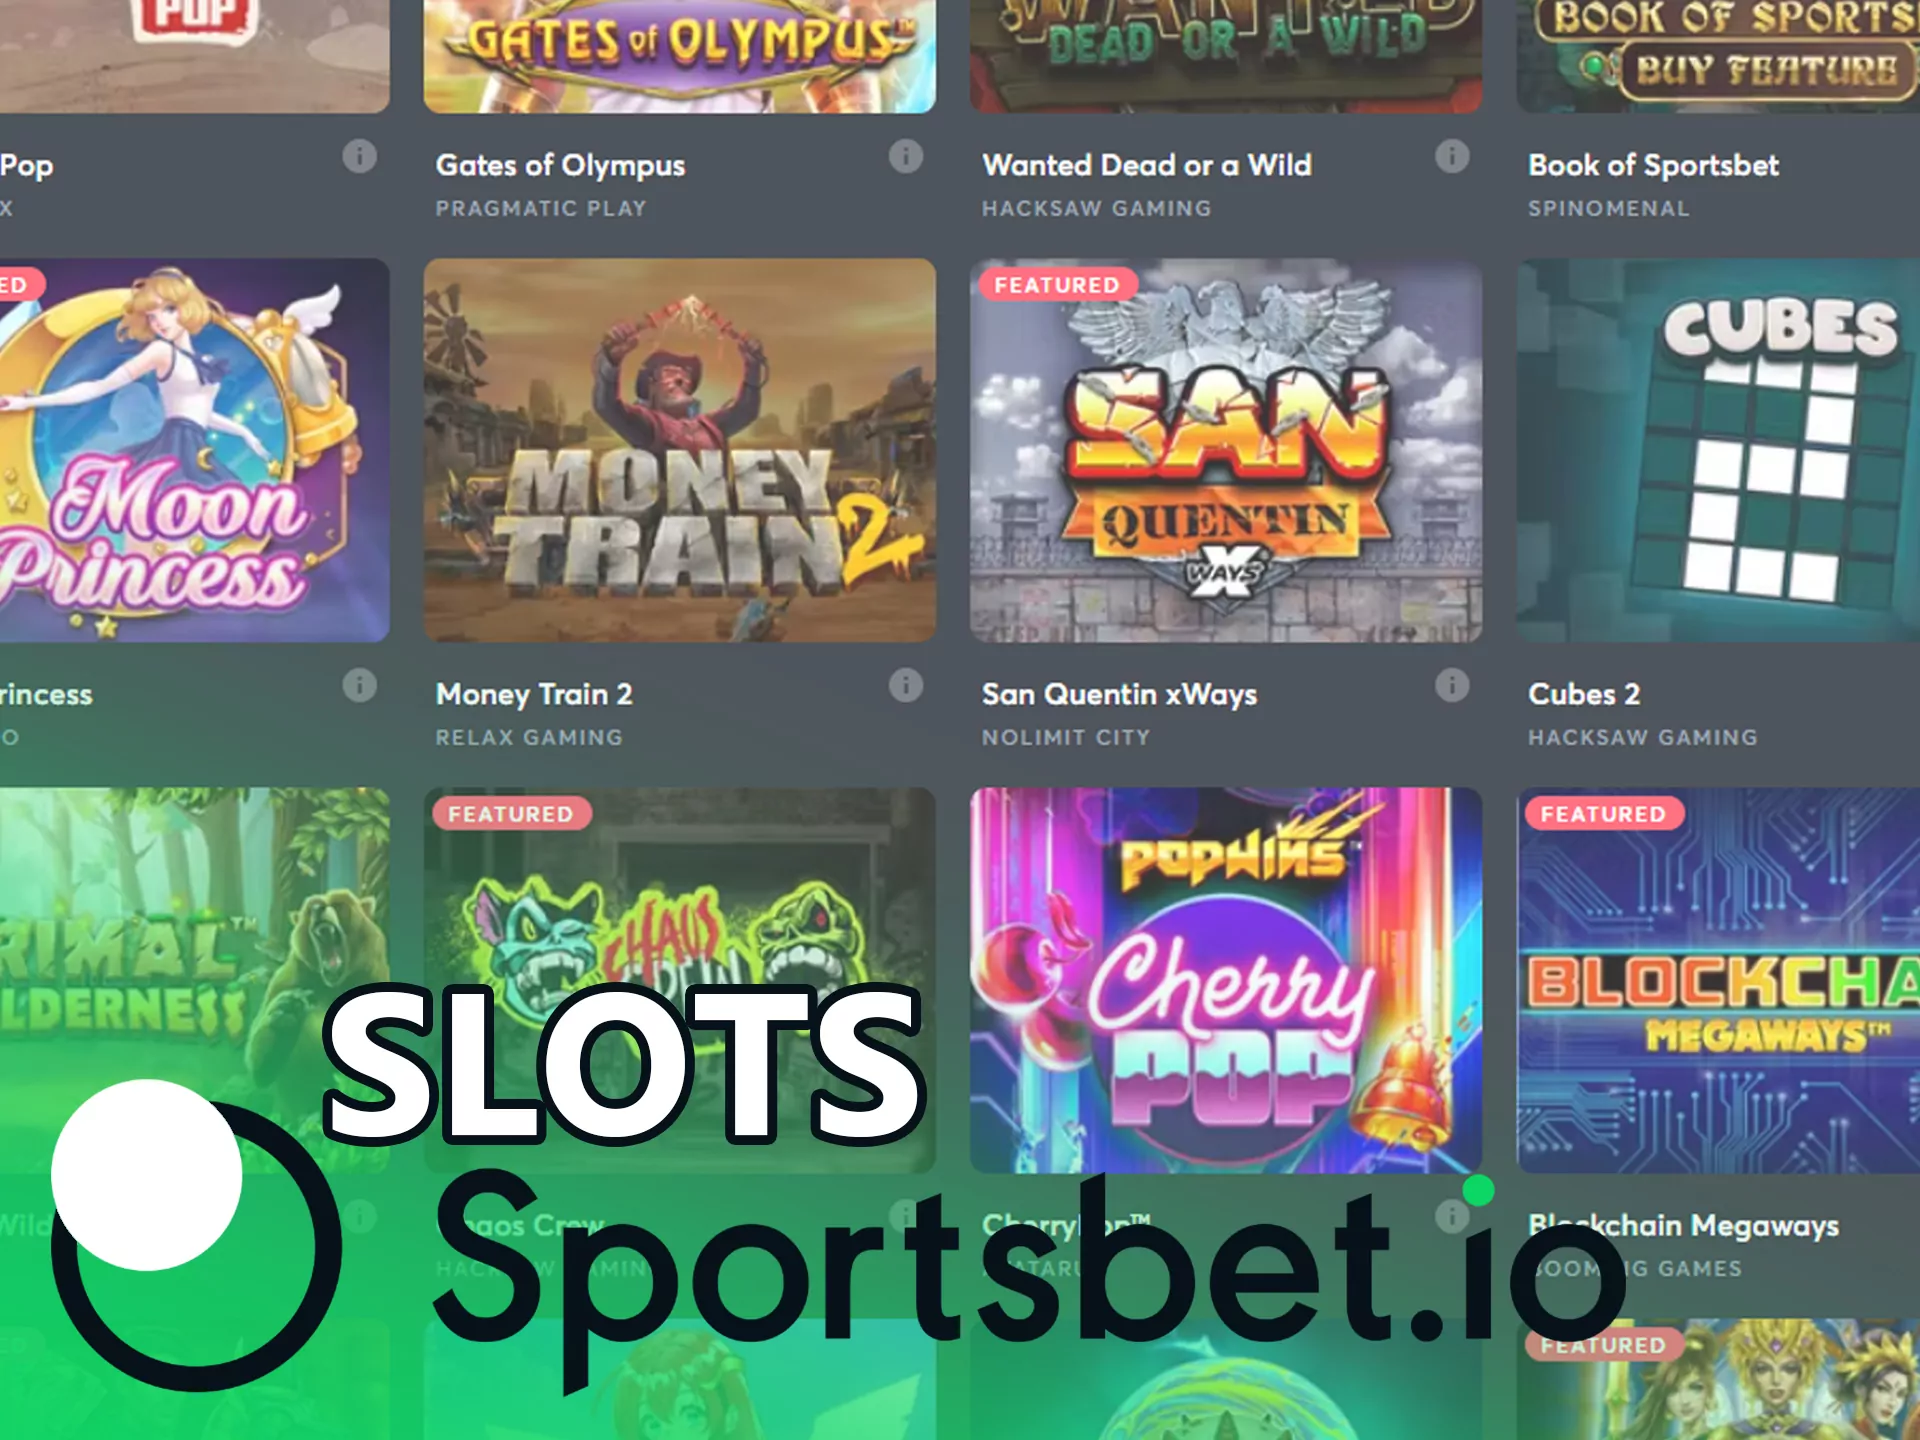 There are many different slots in the Sportsbet casino.